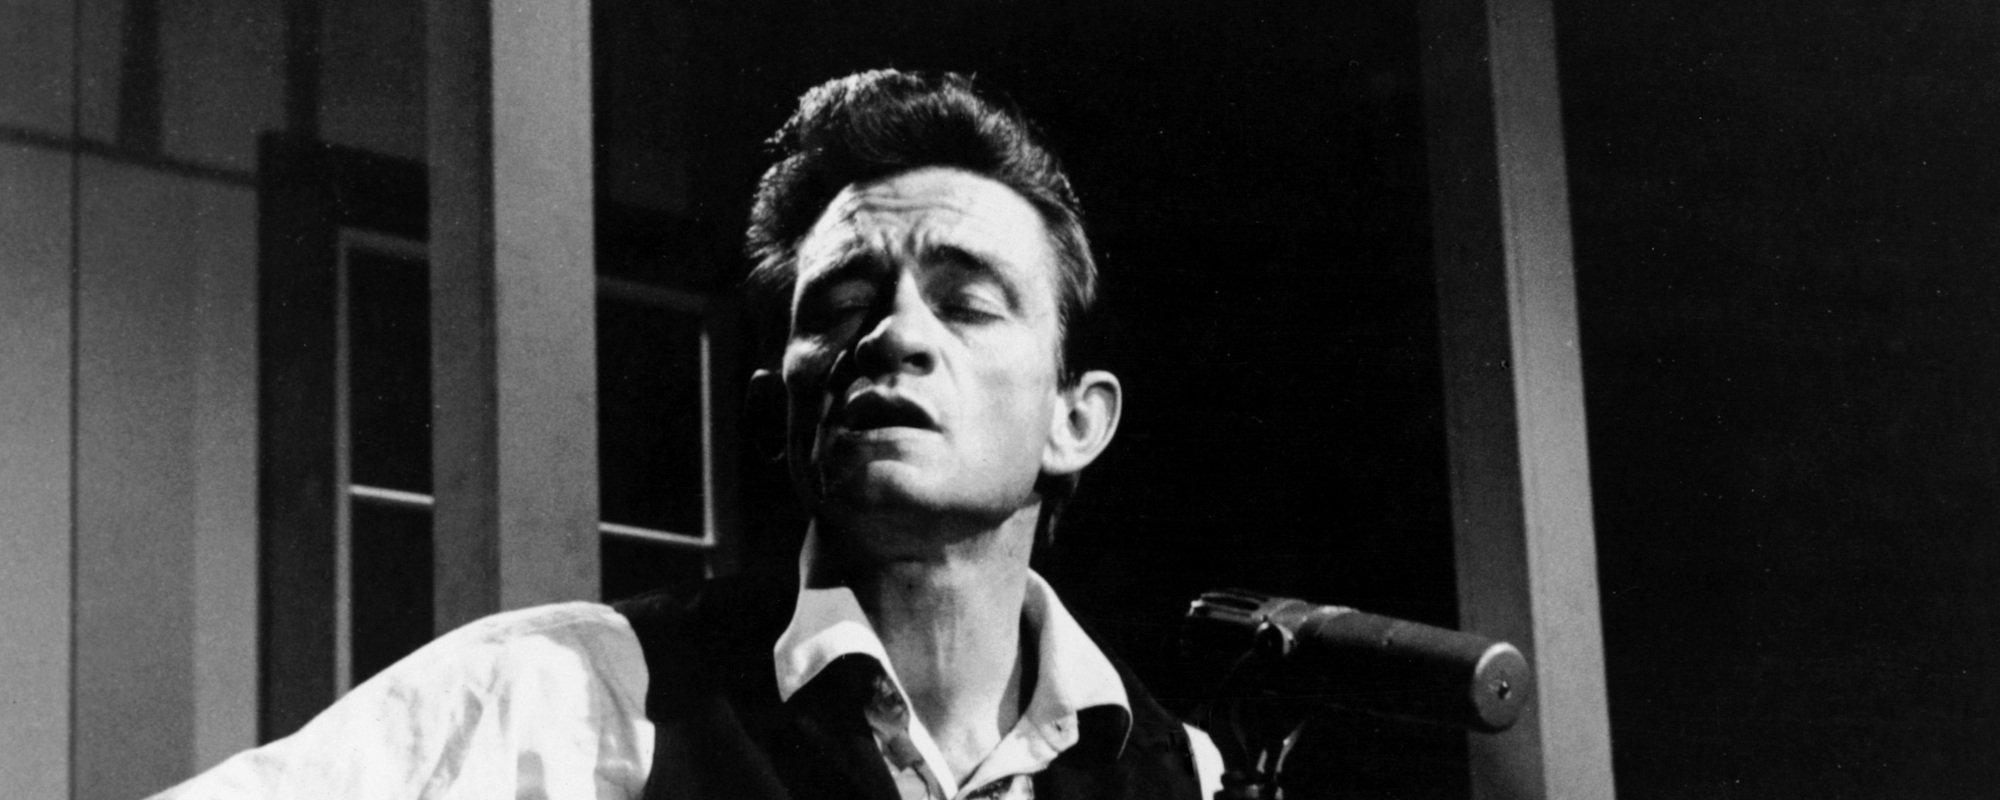 10 Songs You Didn't Know Johnny Cash Wrote for Other Artists